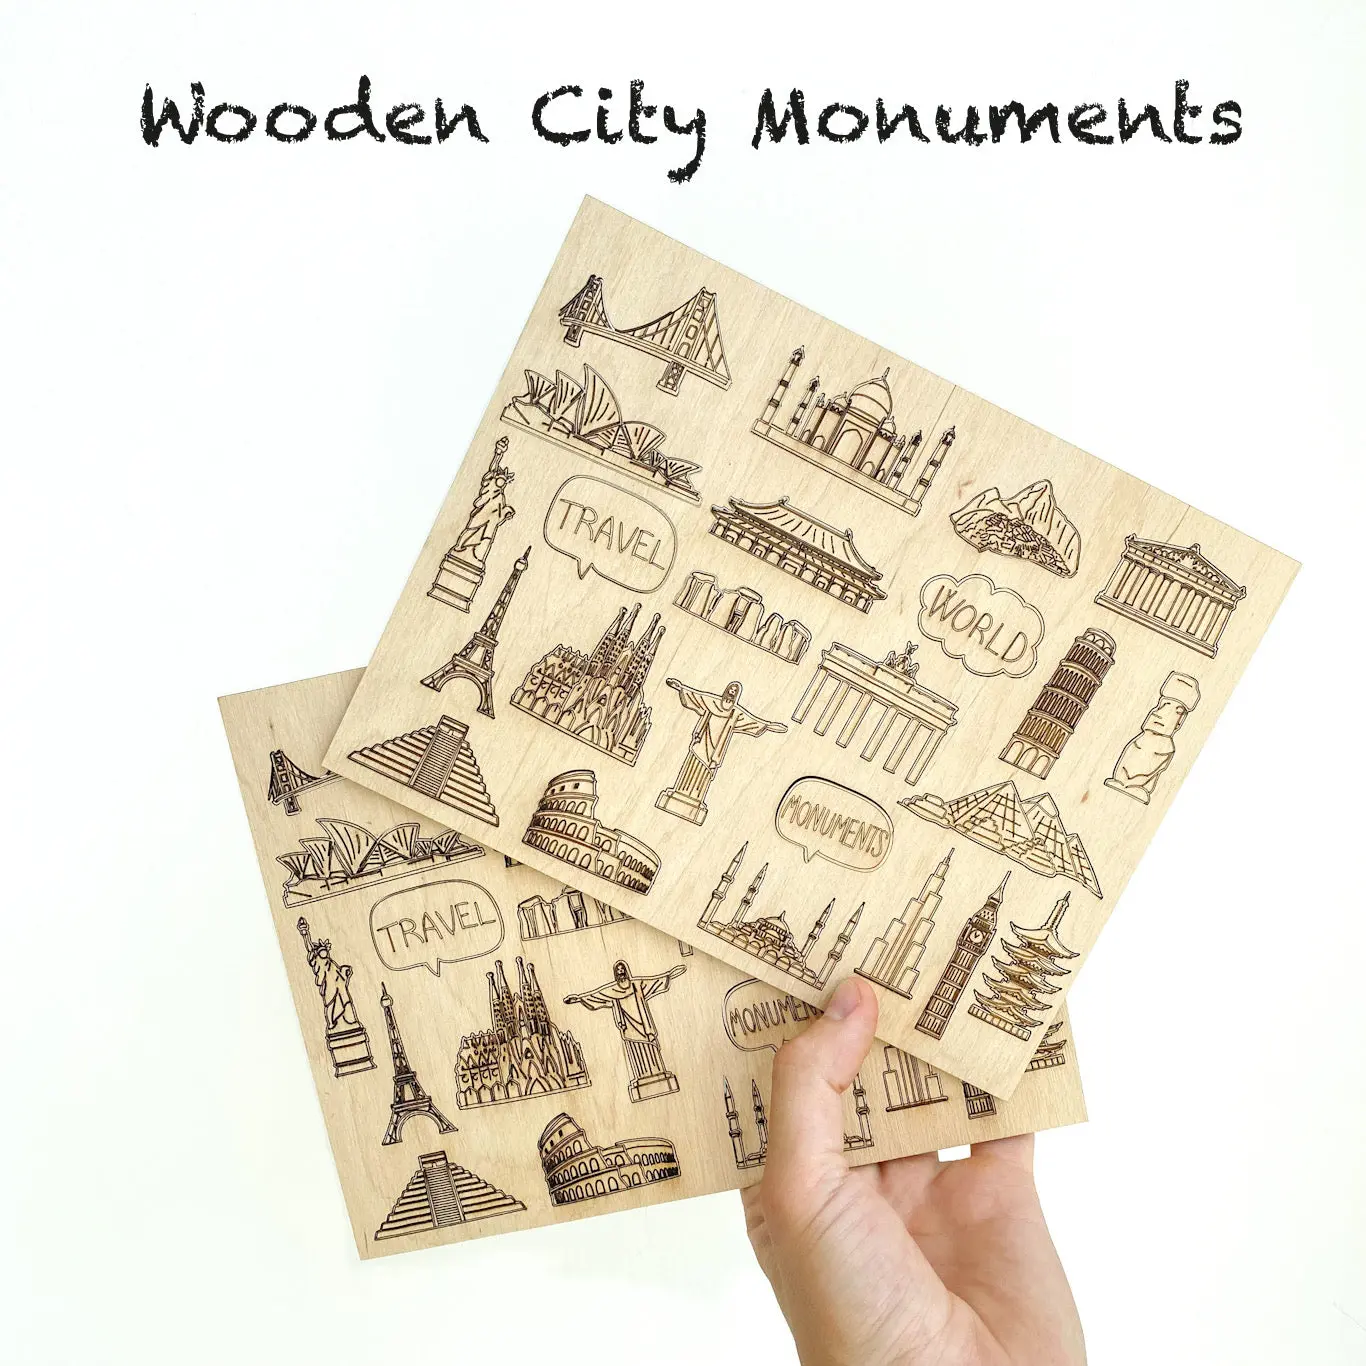 Wooden City Monuments